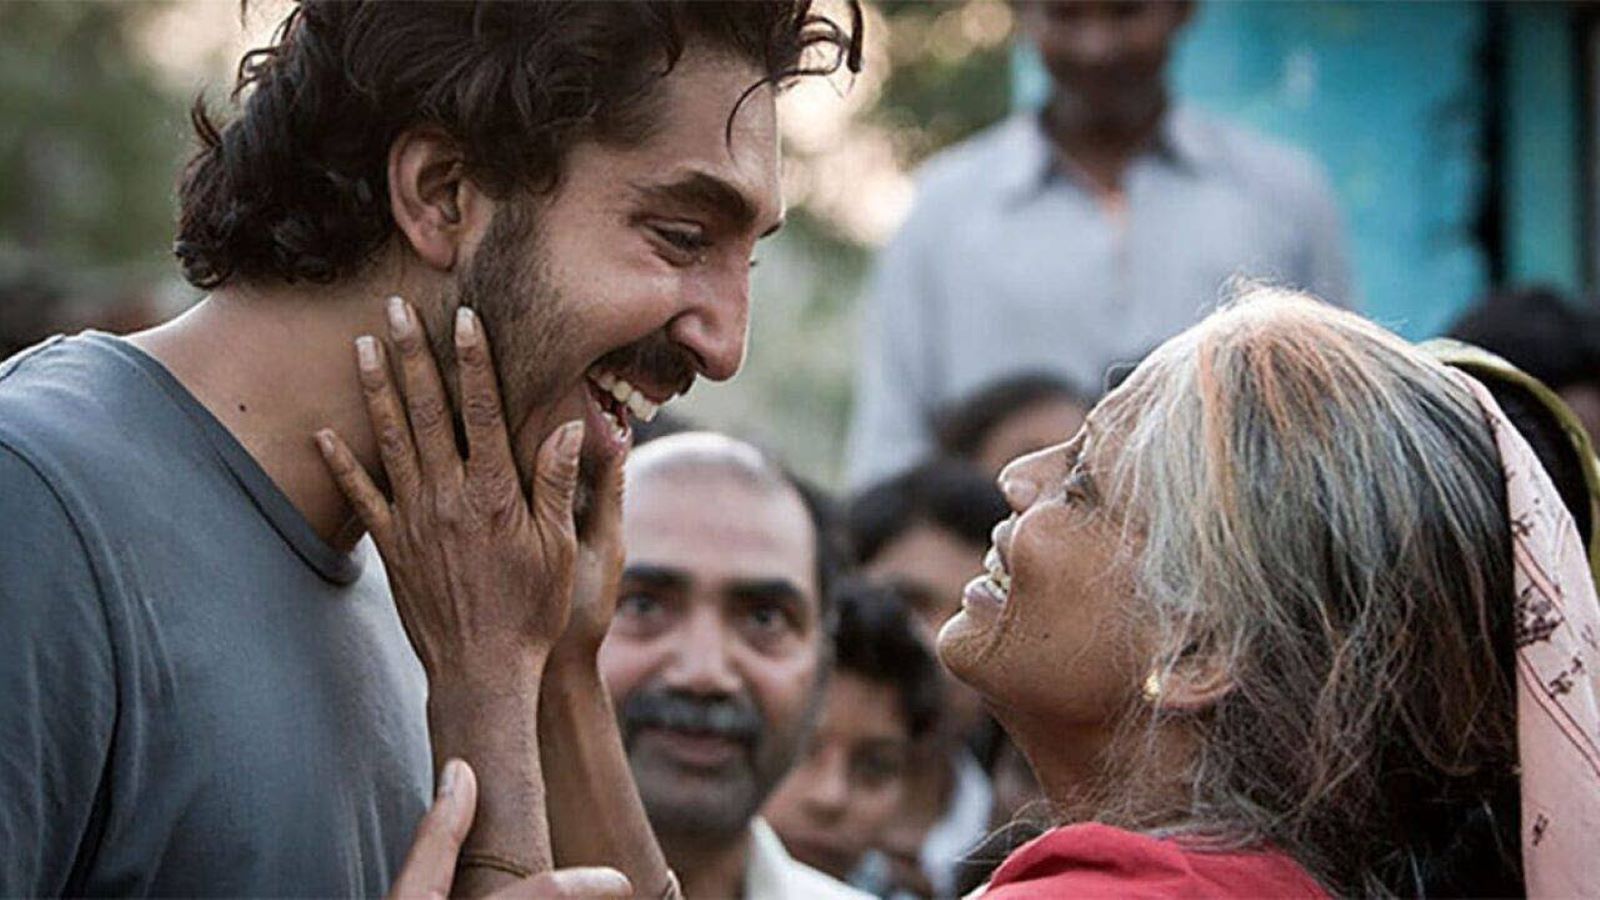 Leo - The road home, tonight on Iris: the real story, plot and cast of the film with Dev Patel